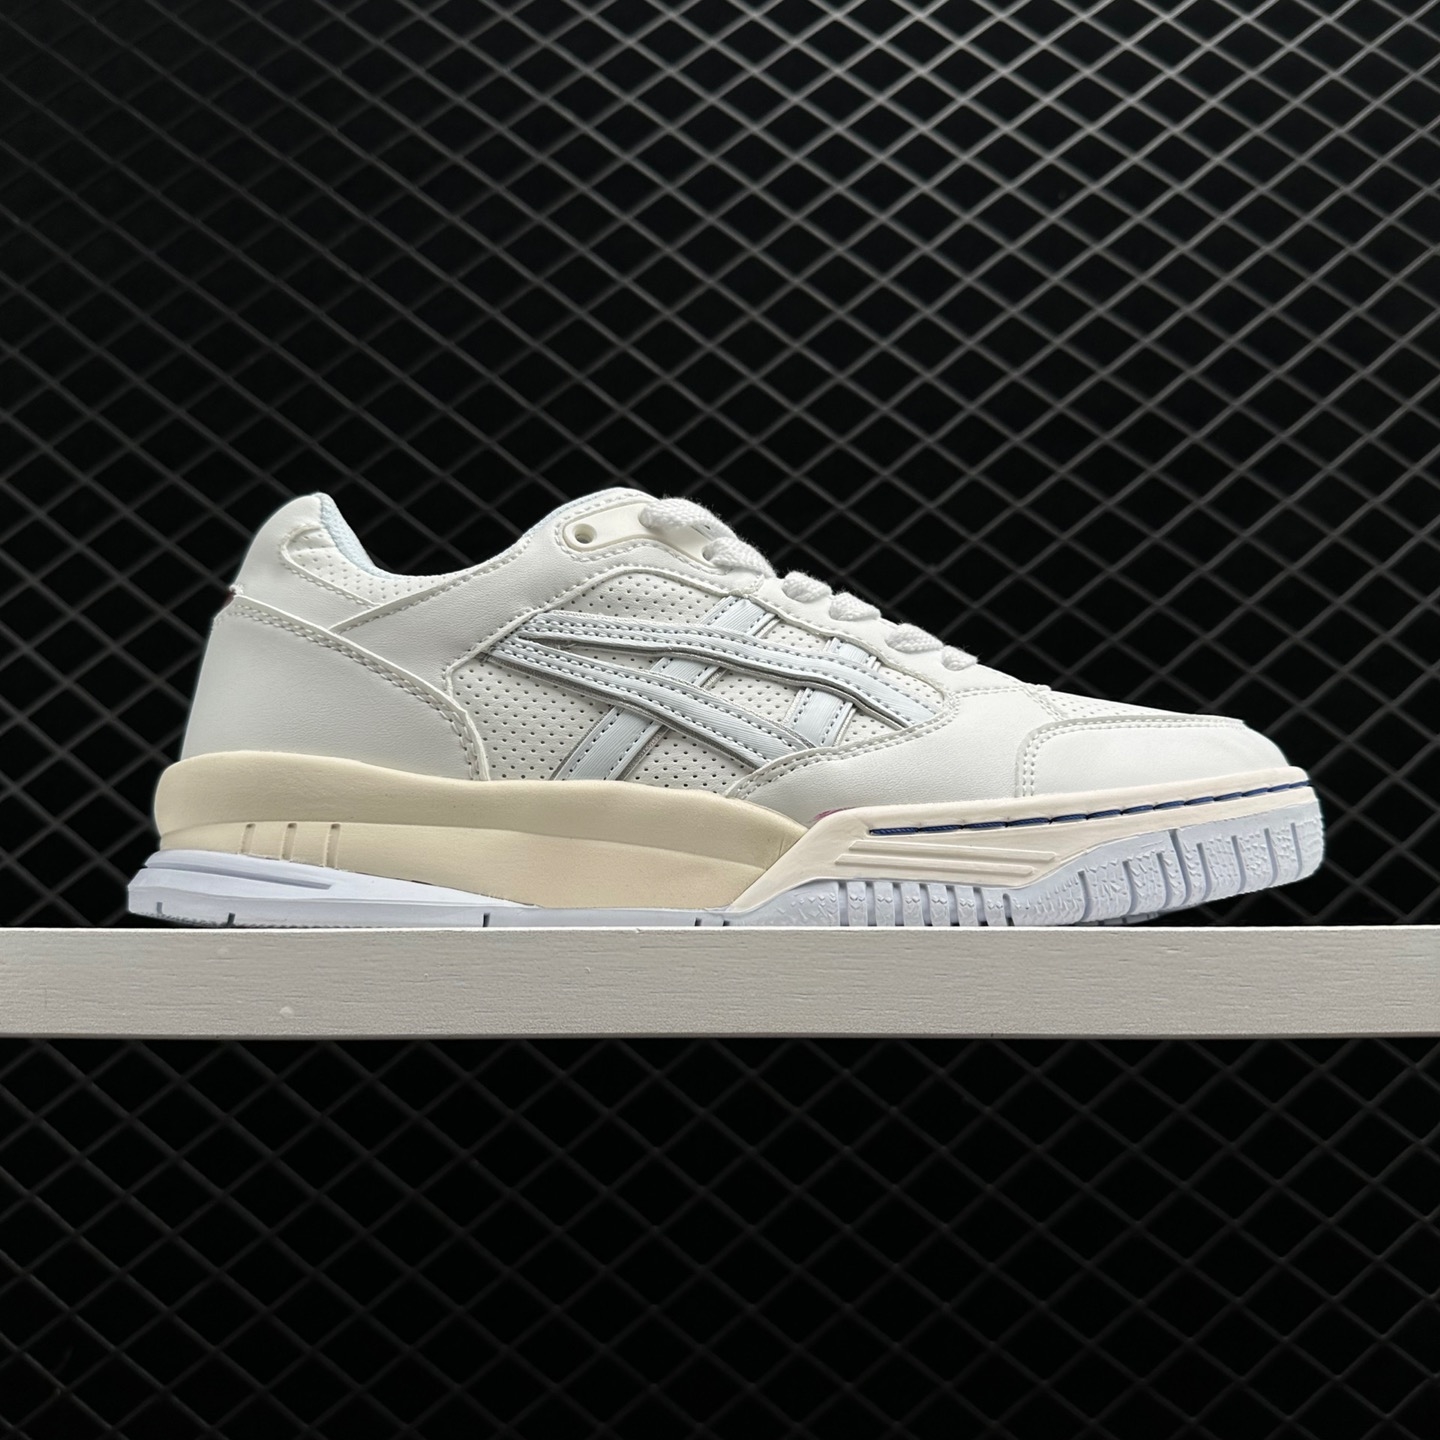 Asics Gel-Spotlyte Low White: Sleek and Stylish Athletic Sneakers